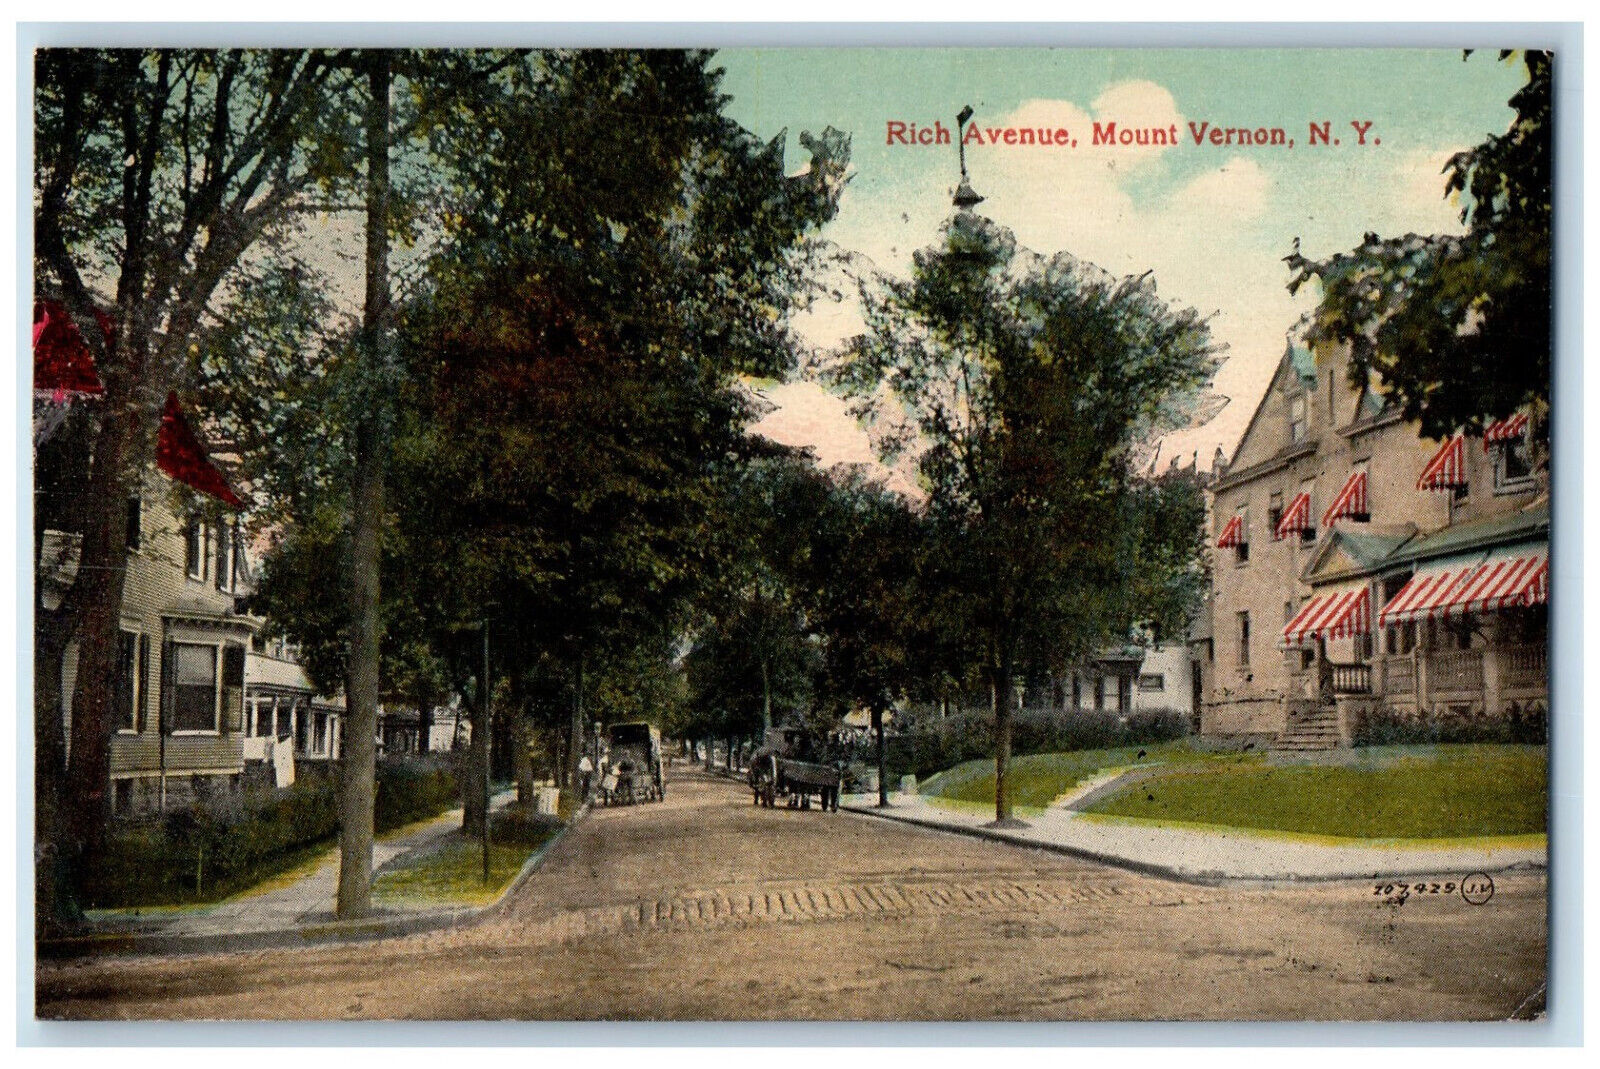 1917 Horse Carriages, Big Houses, Rich Avenue Mount Vernon New York NY Postcard